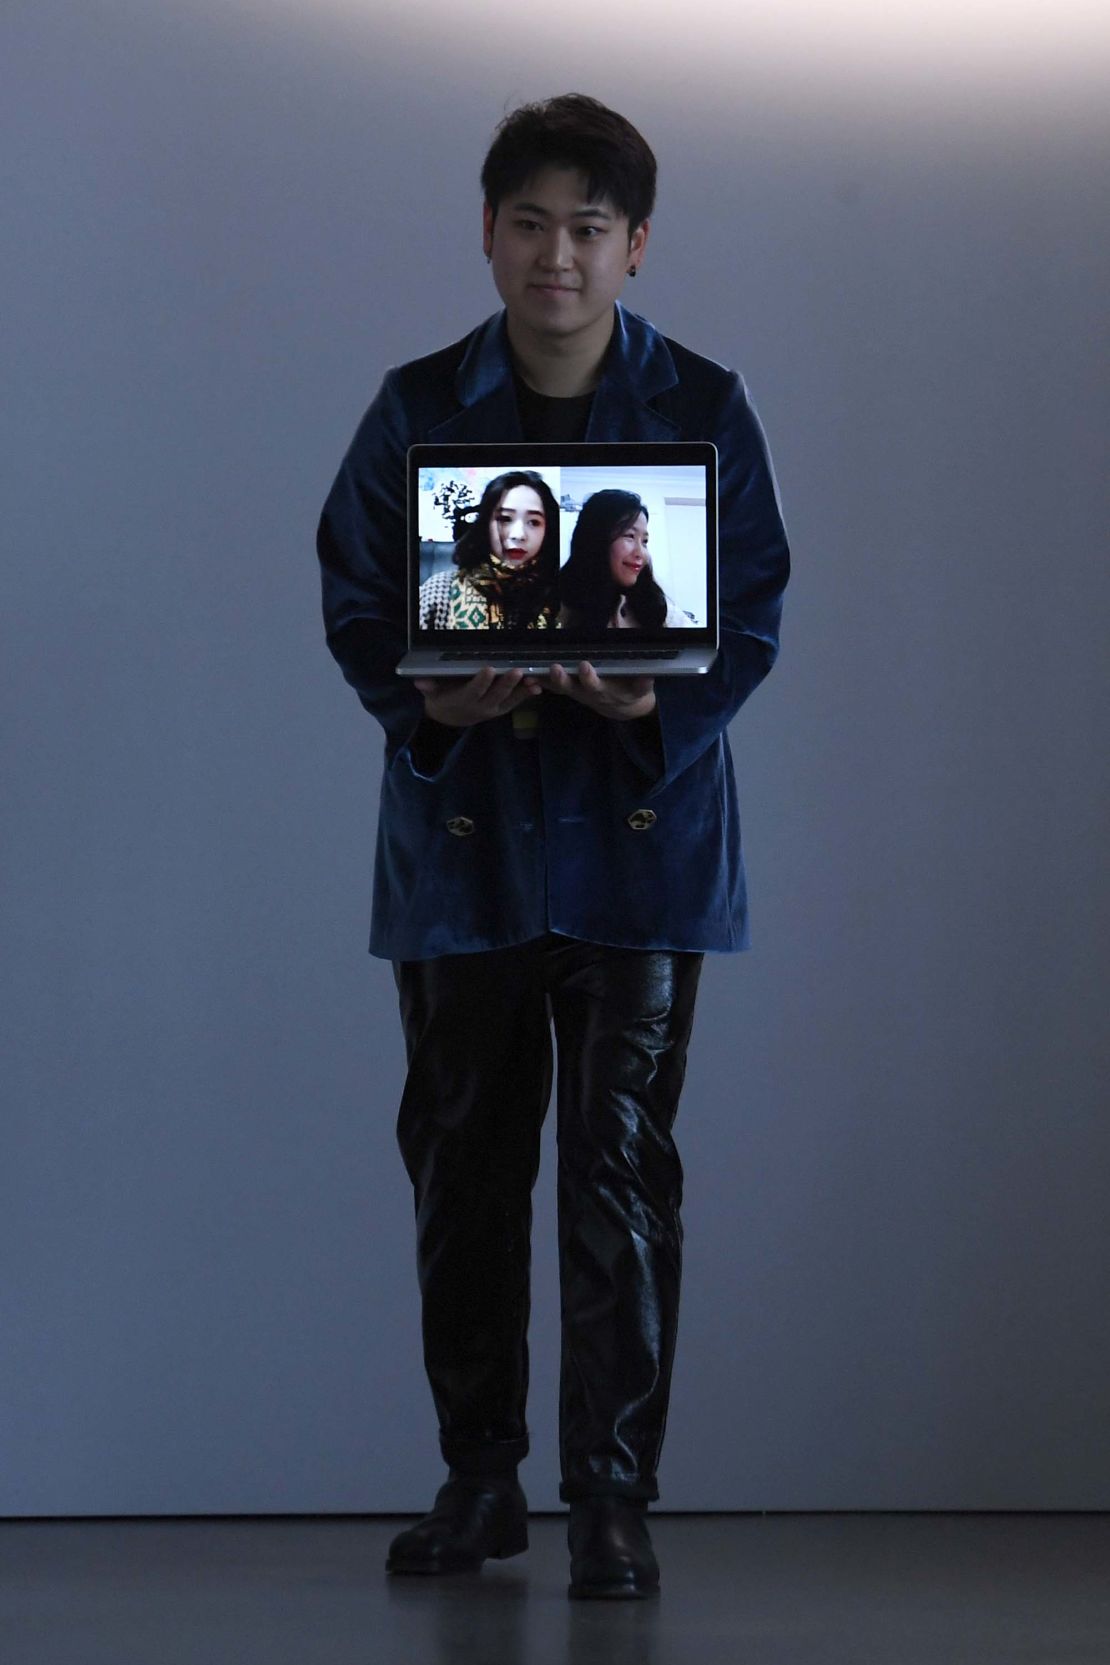 Designers behind Luooif Studio shown via video chat during New York Fashion Week on February 10, 2020 in New York City.